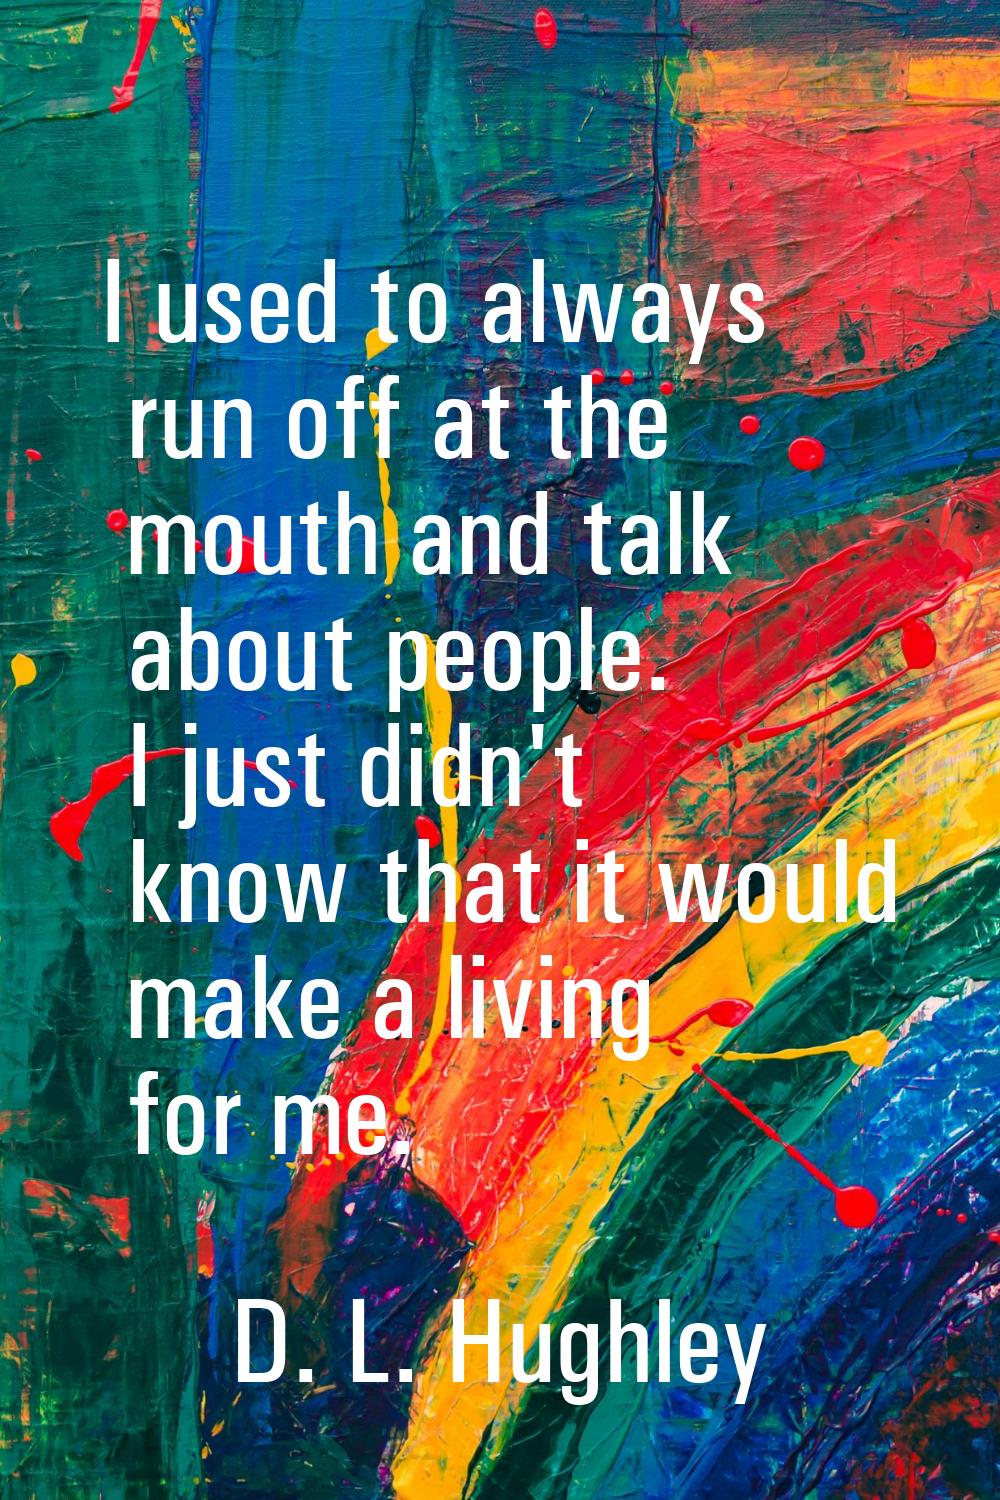 I used to always run off at the mouth and talk about people. I just didn't know that it would make 